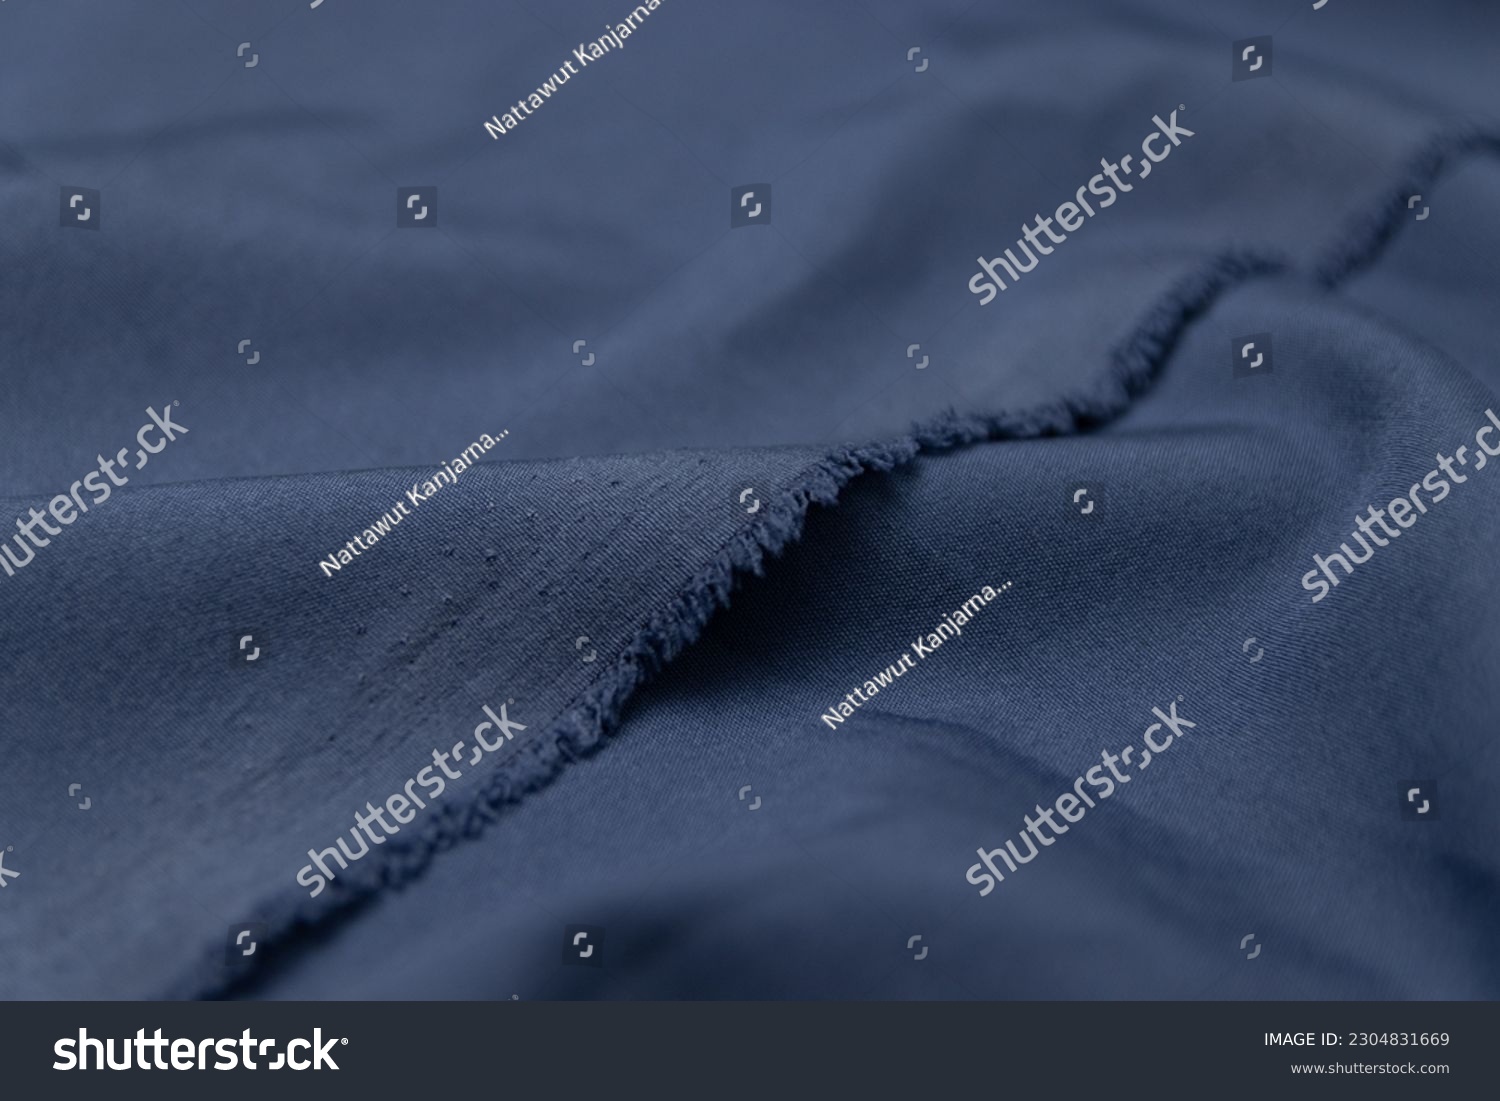 Folded indigo blue colored fabric texture background. This fabric is made of polyester and spandex. #2304831669